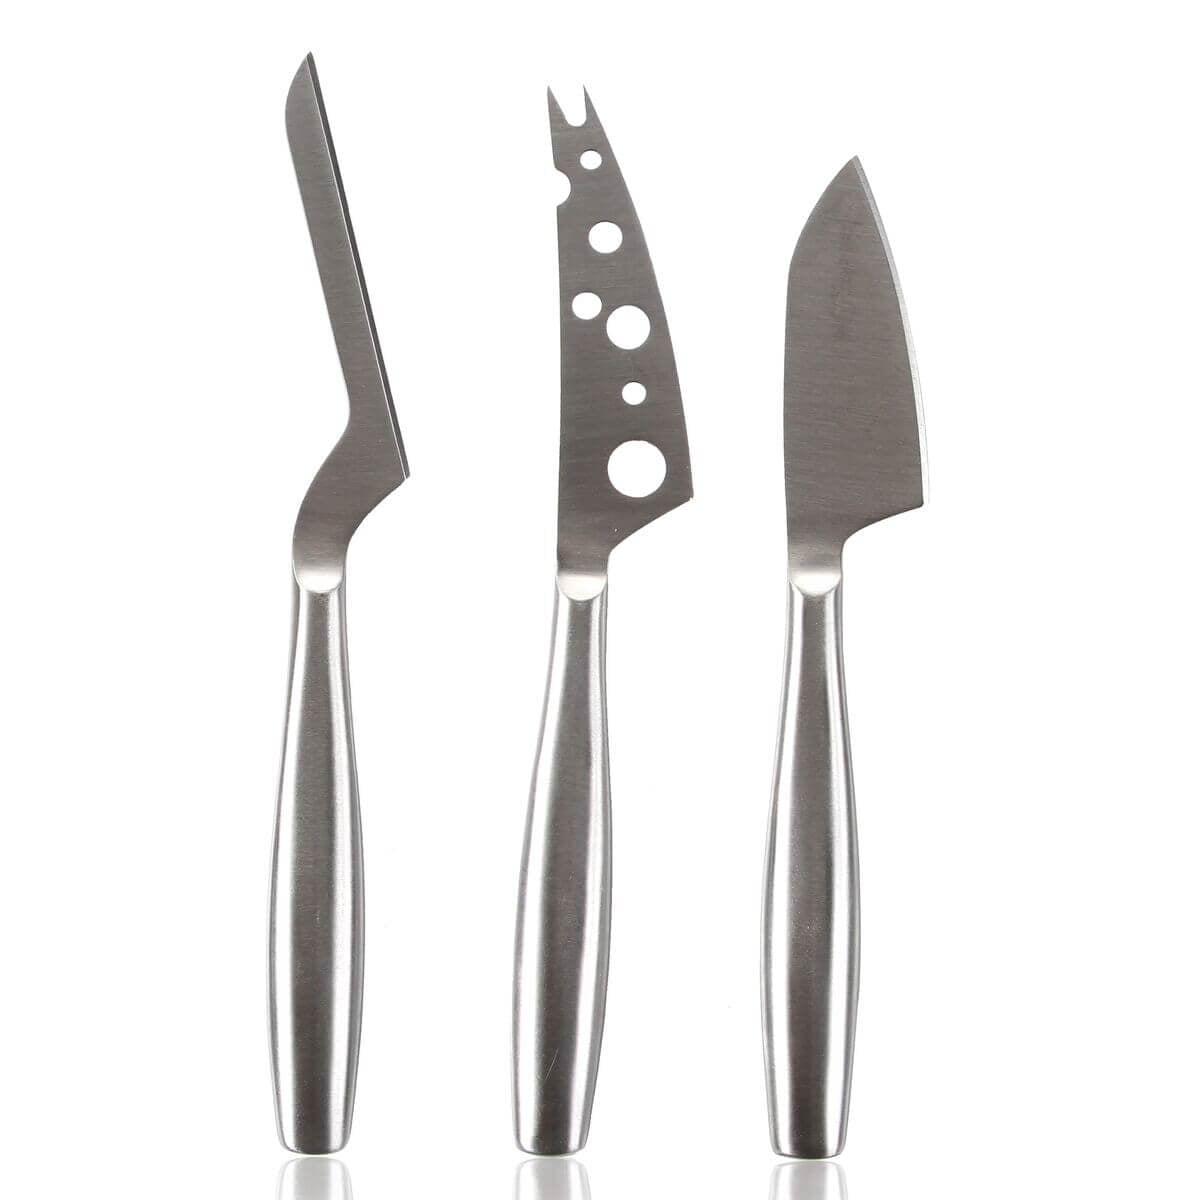 Hecef Cheese Knife Serving Set of 3, Vintage Style Stainless Steel